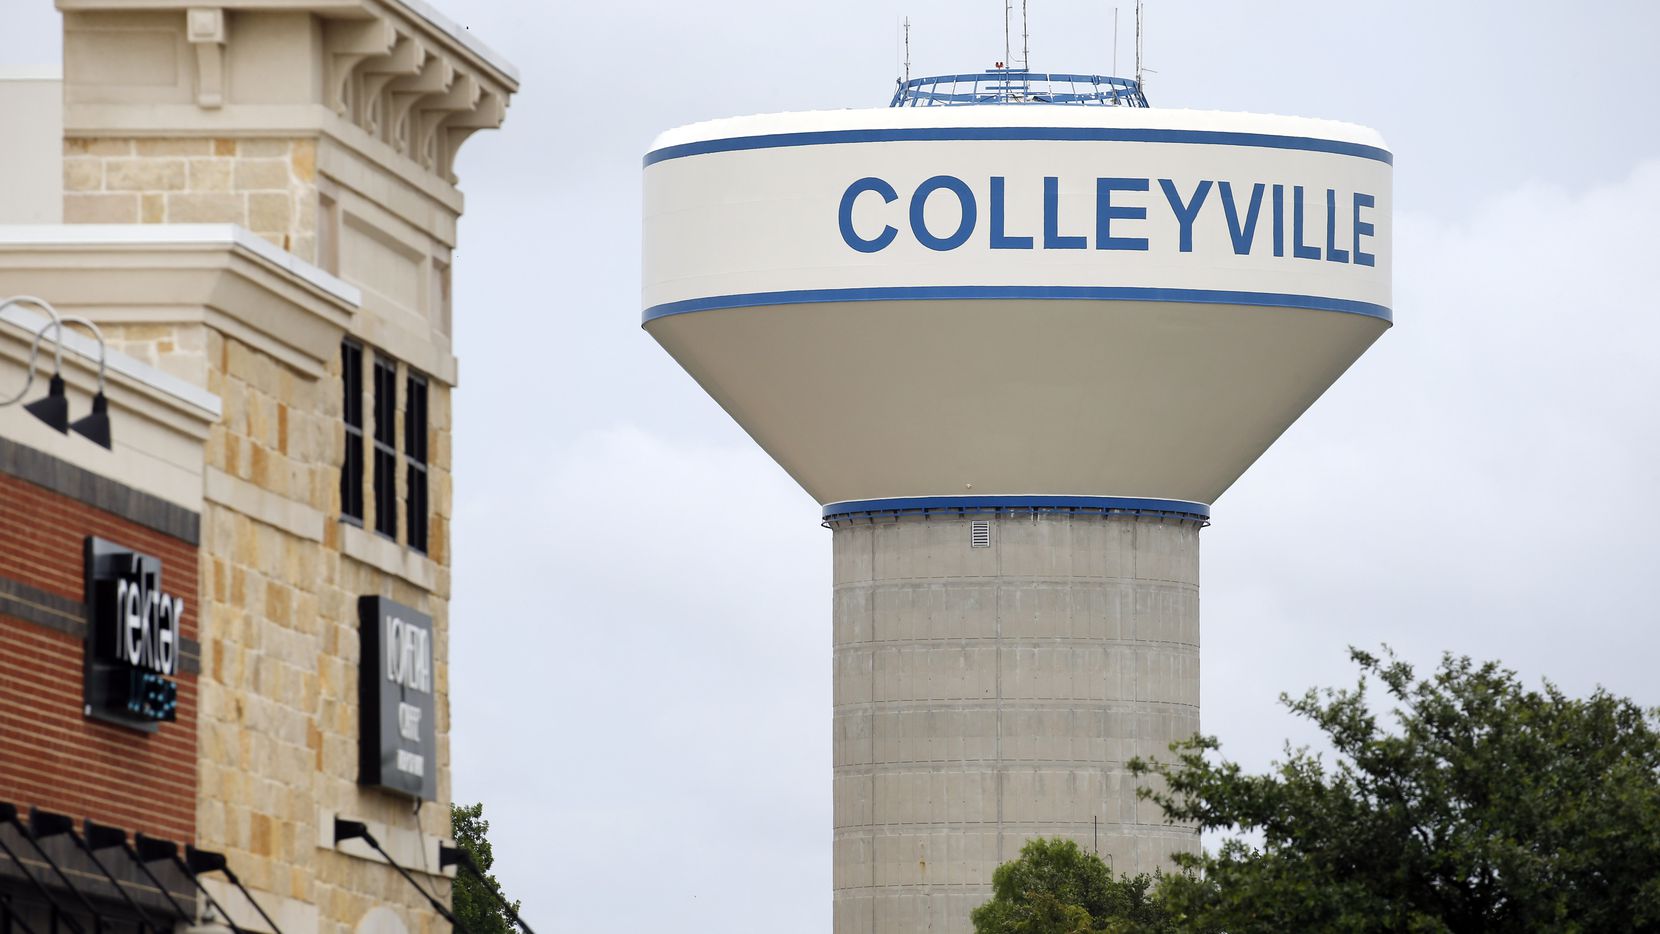 A Colleyville water tower is pictured near a shopping center in Colleyville, Texas, Tuesday, June 23, 2020. (Tom Fox/The Dallas Morning News)